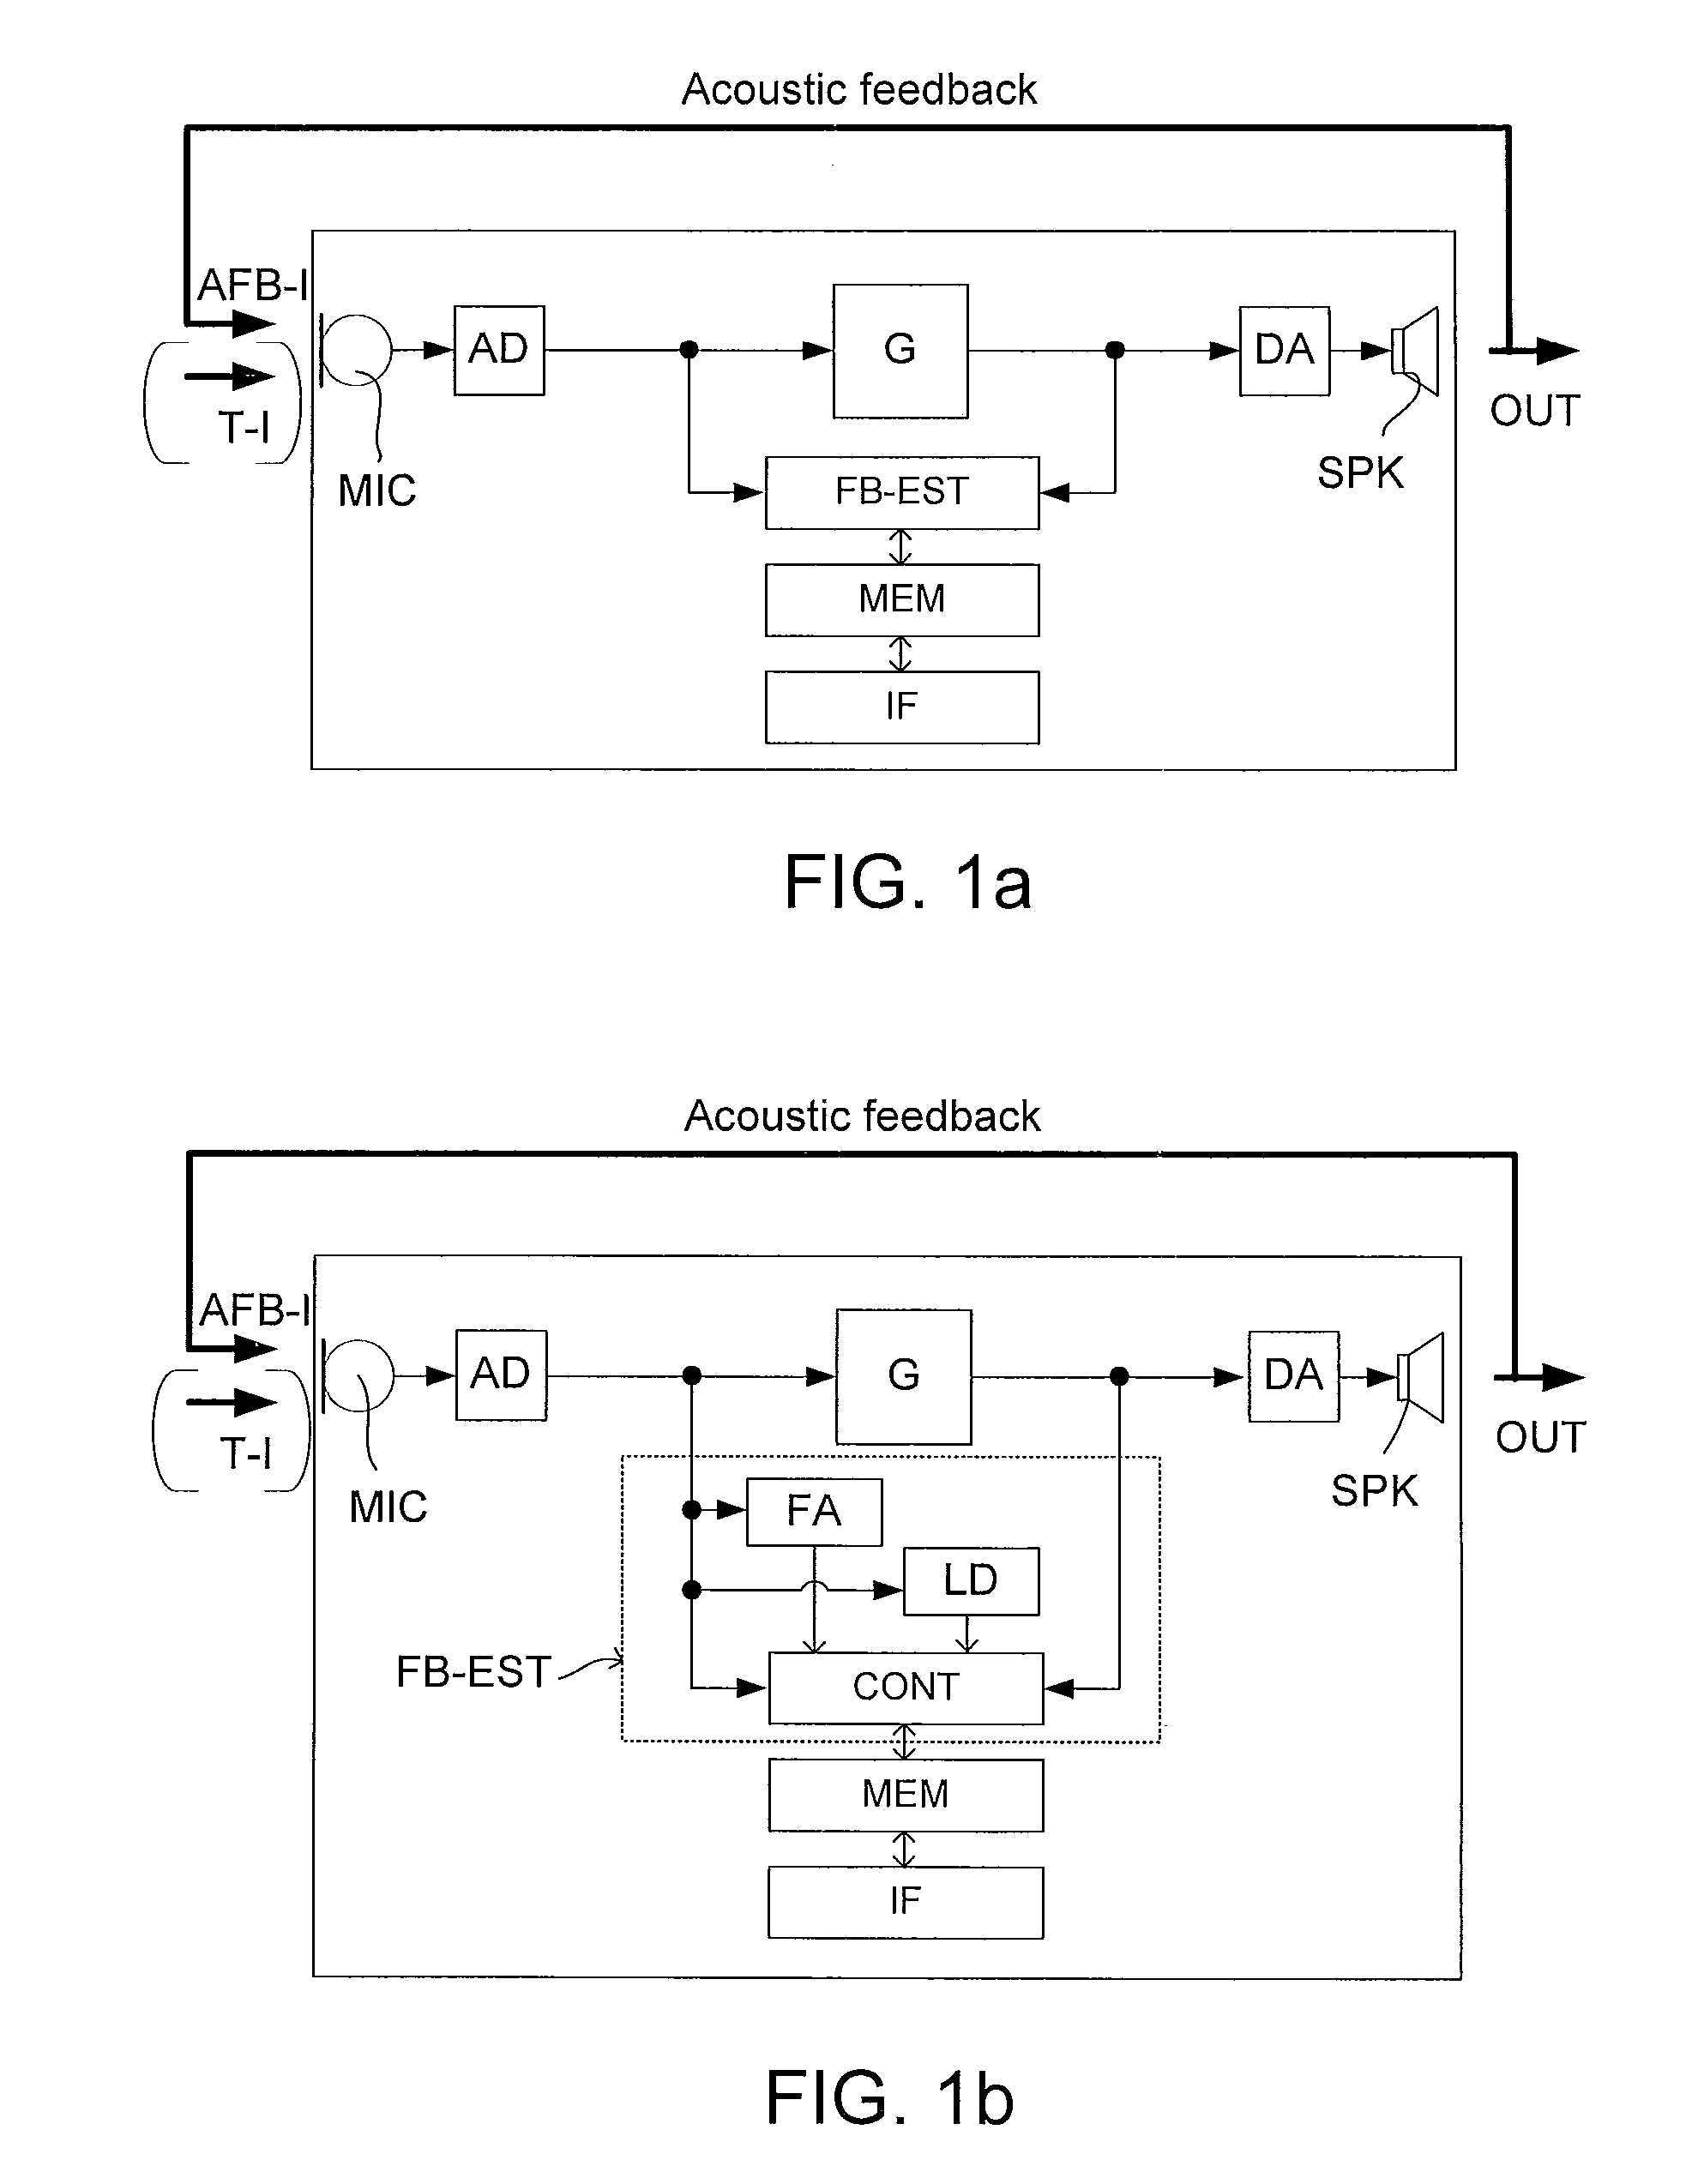 Test system for evaluating feedback performance of a listening device